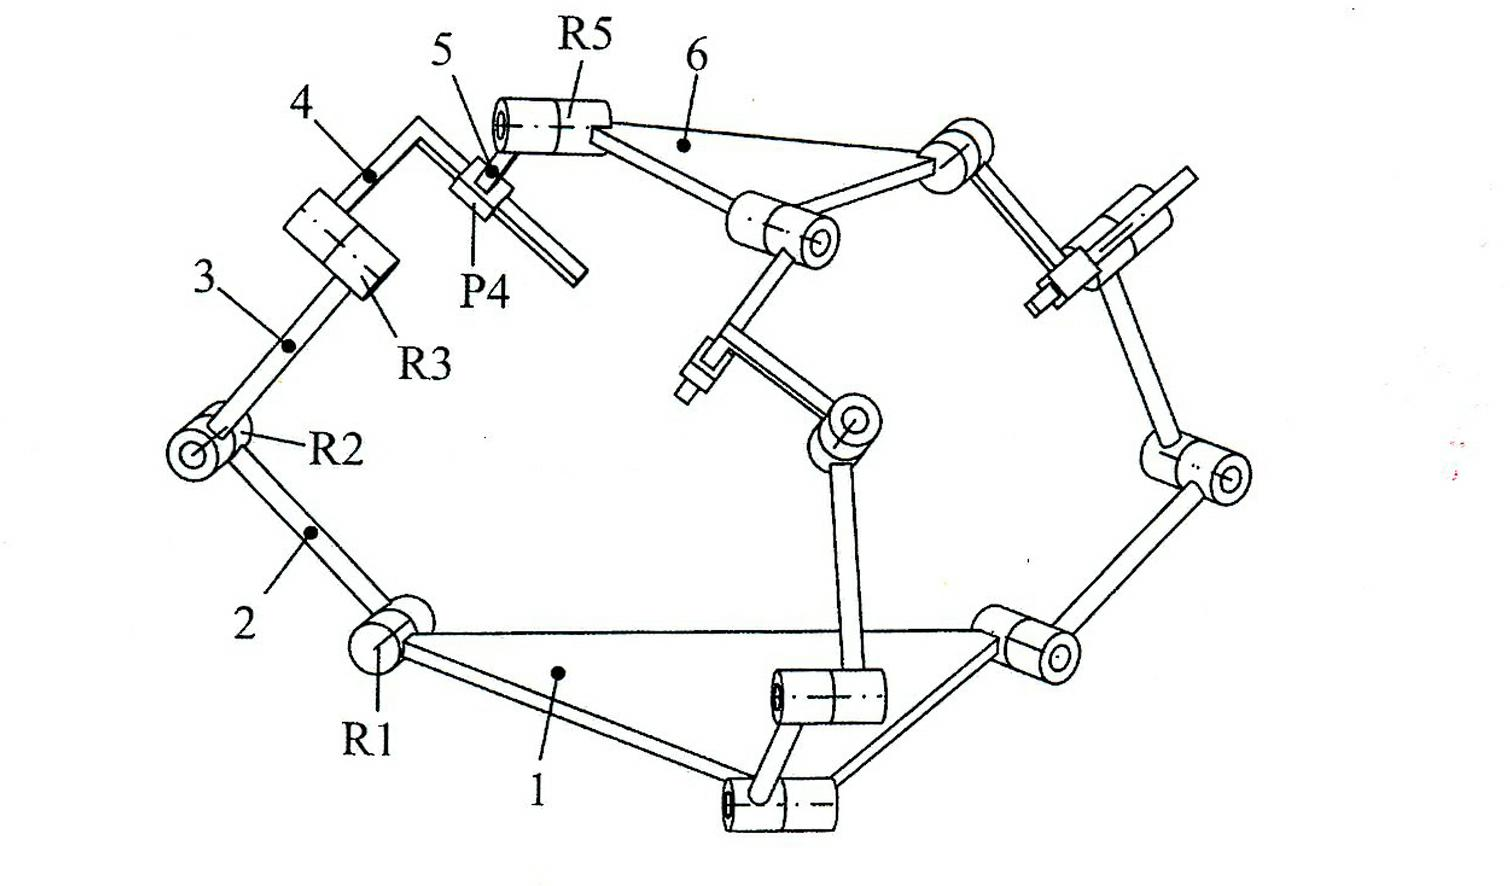 Non-concurrent axis symmetric two-rotation one-movement parallel mechanism with two-degree of freedom planar subchains